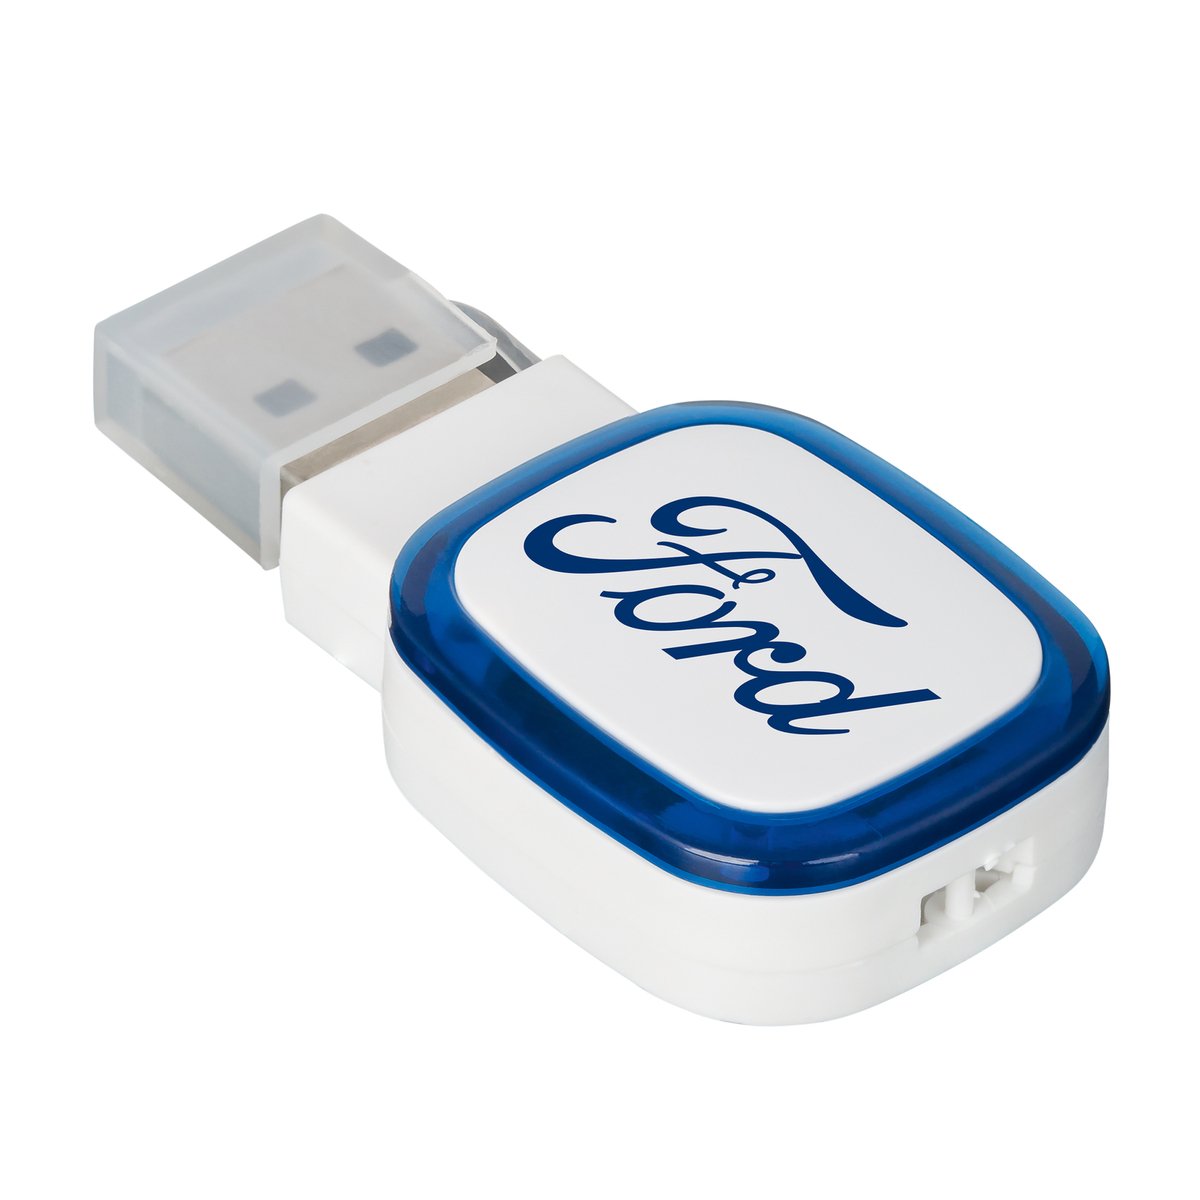 USB Flash Drive COLLECTION 500 blue 4GB